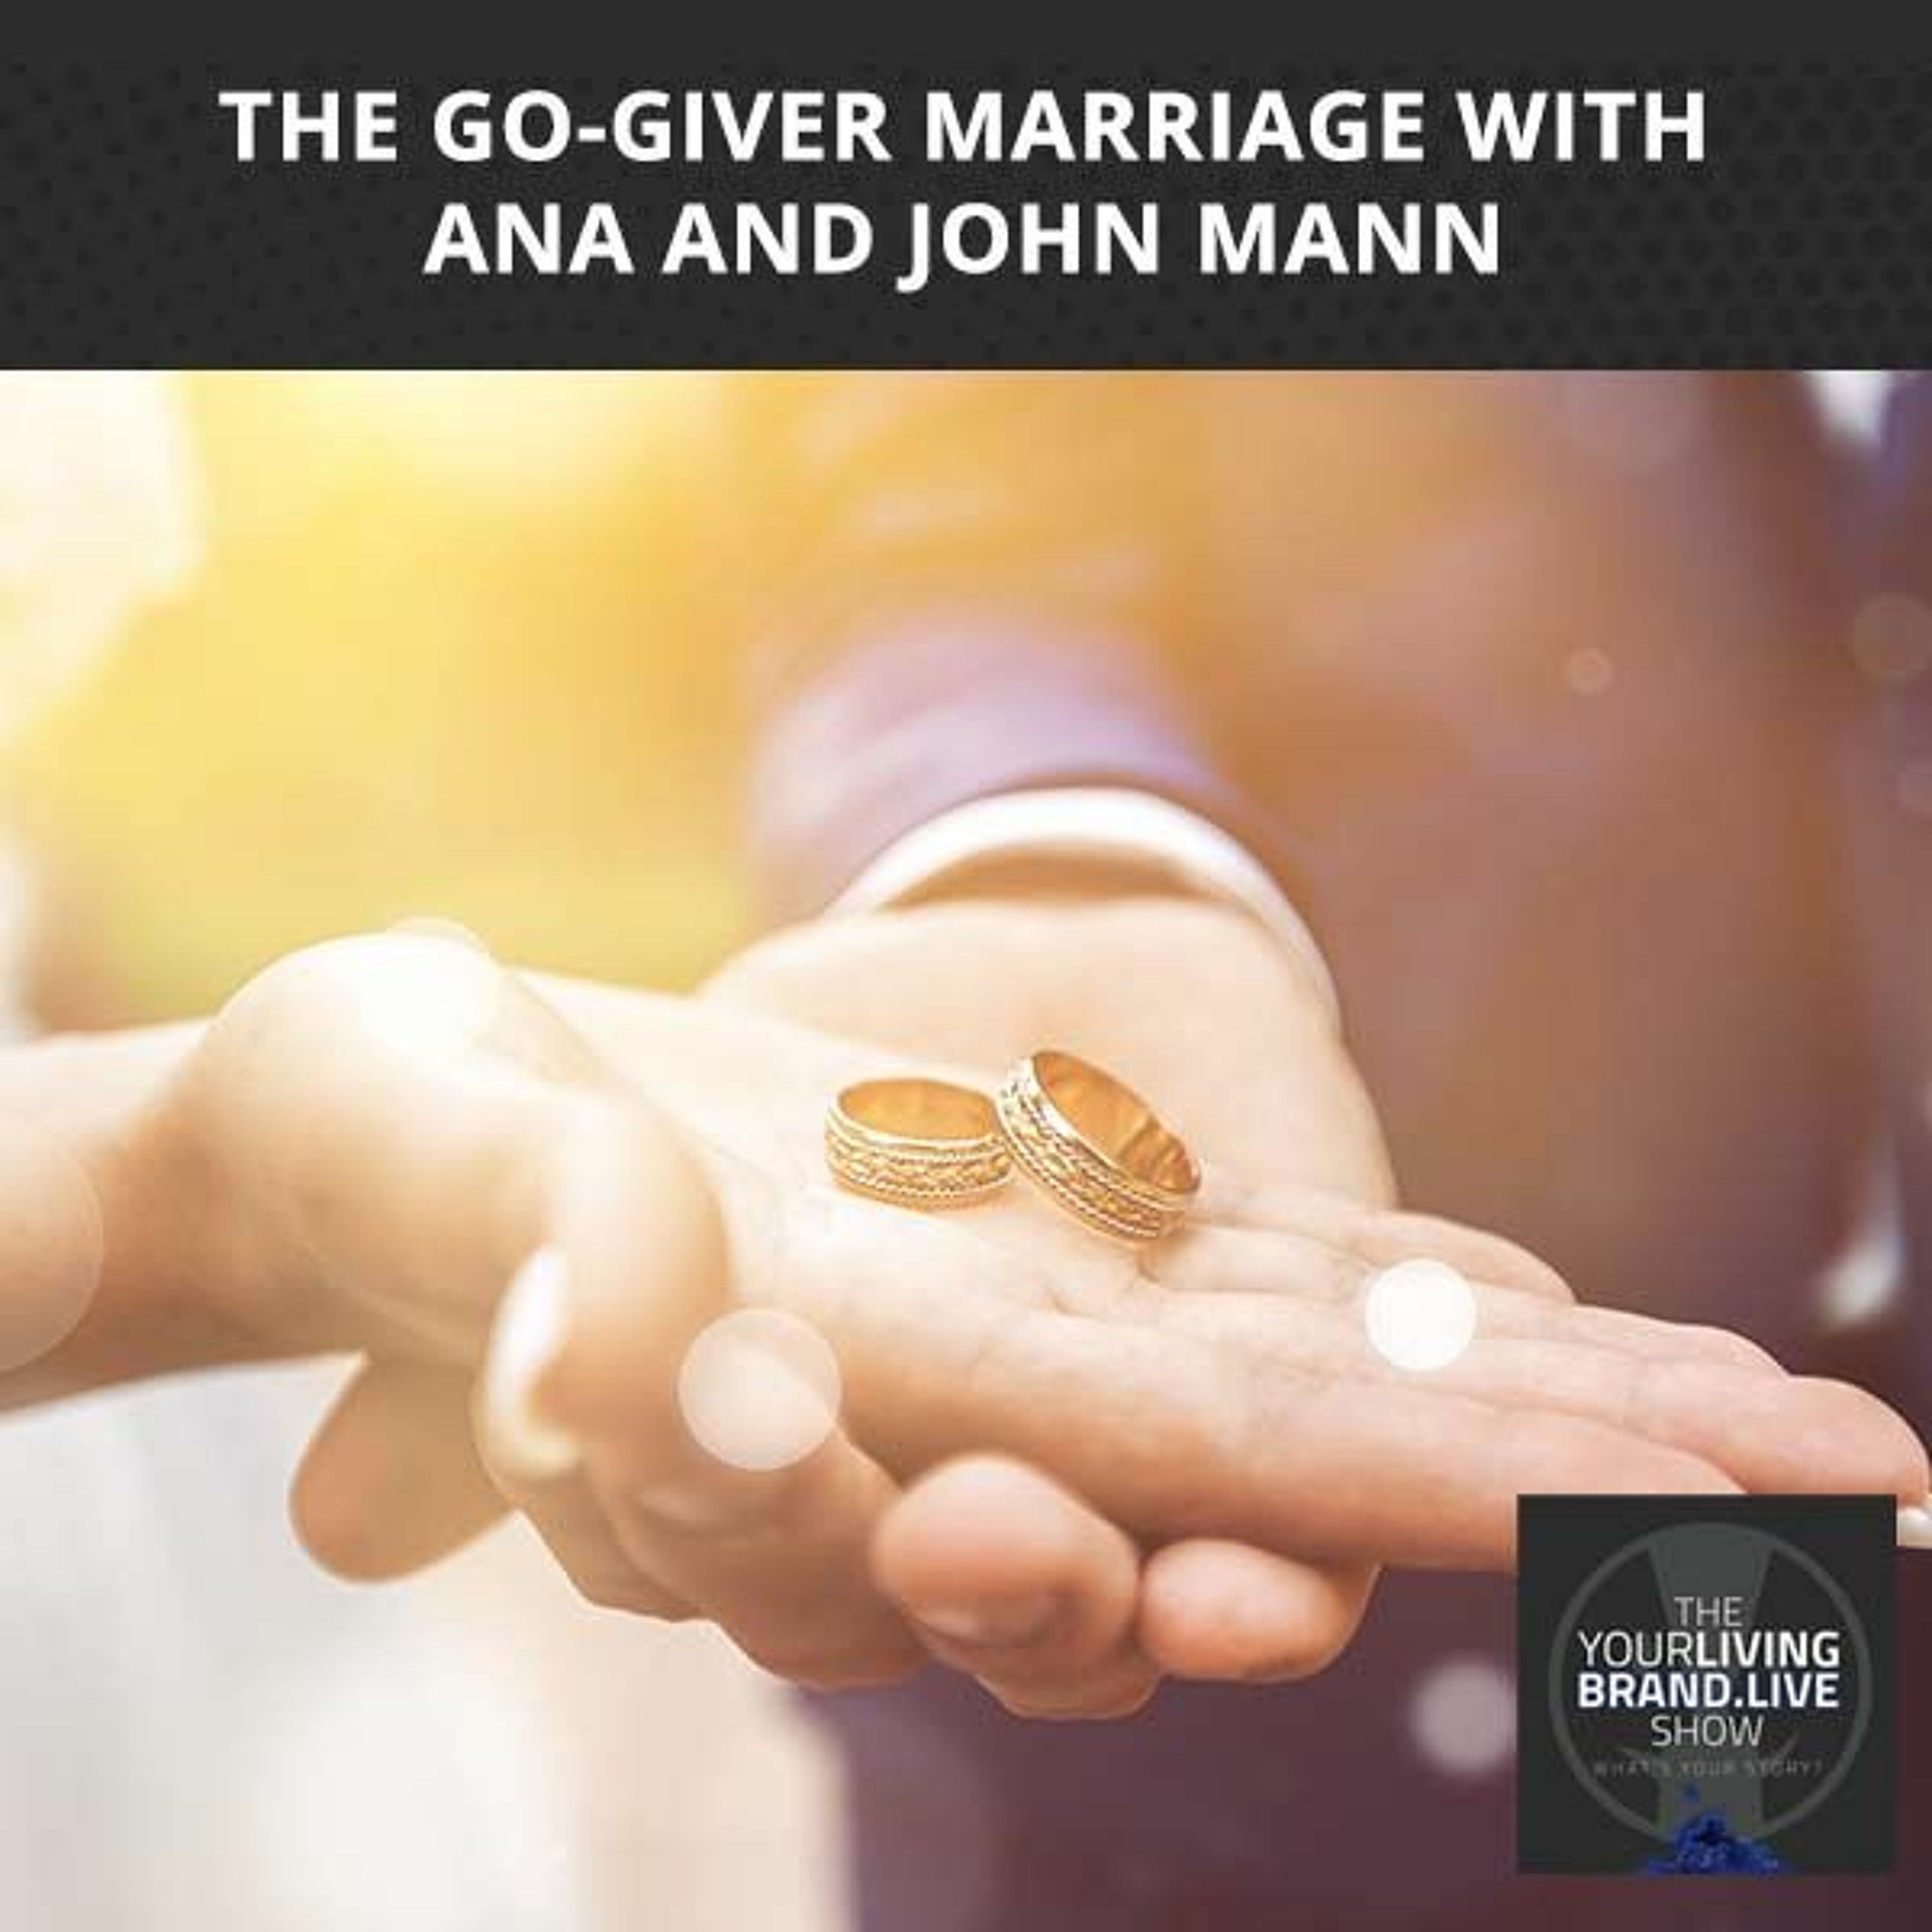 The Go-Giver Marriage With Ana And John Mann